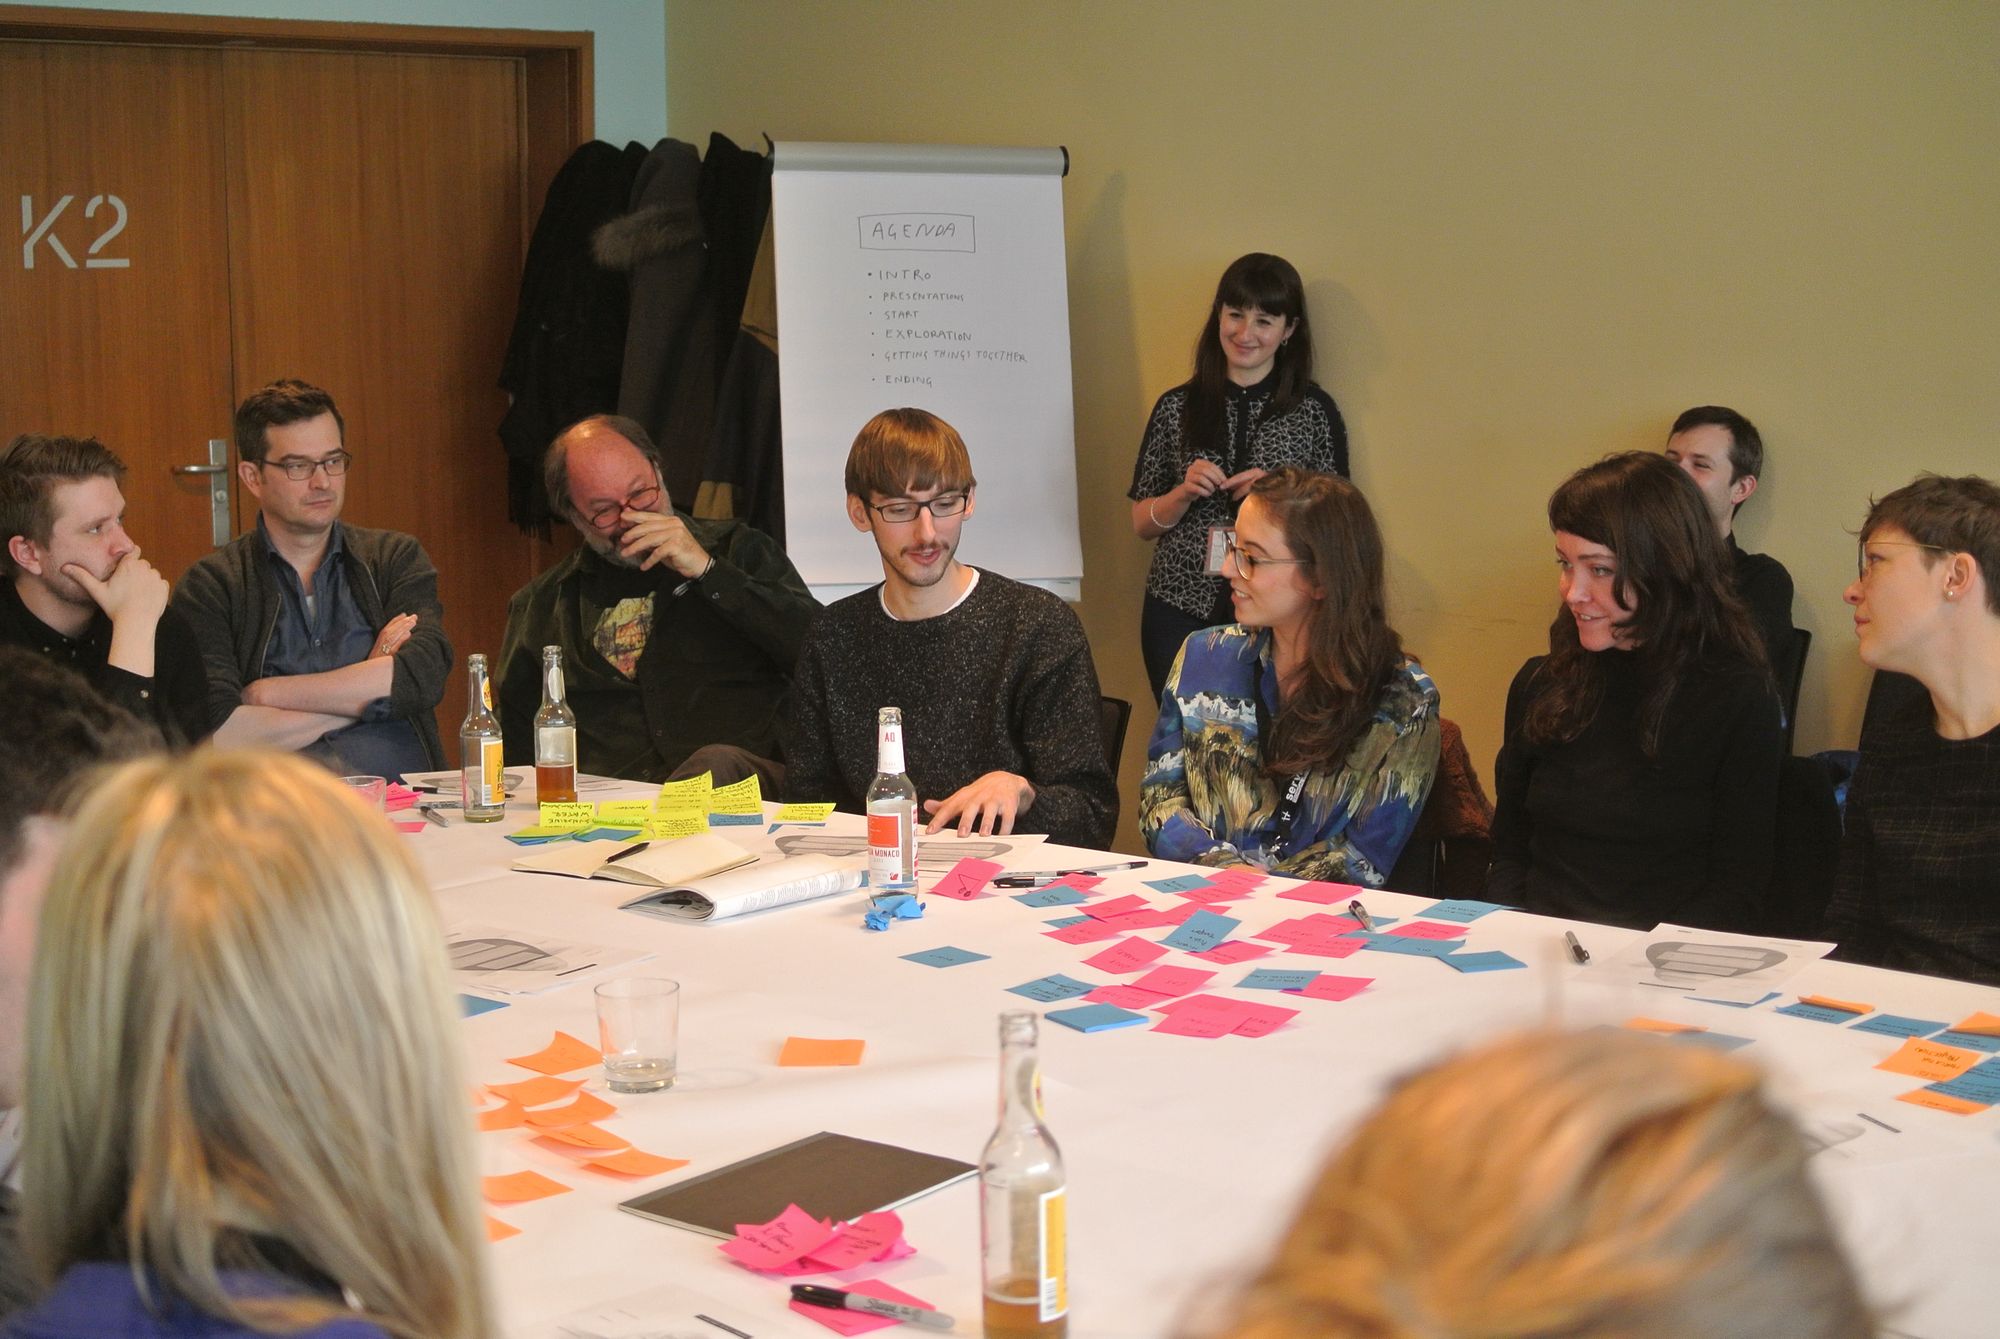 A photograph of a group of people sitting at a table discussing ideas shared on post its at transmediale festival in berlin